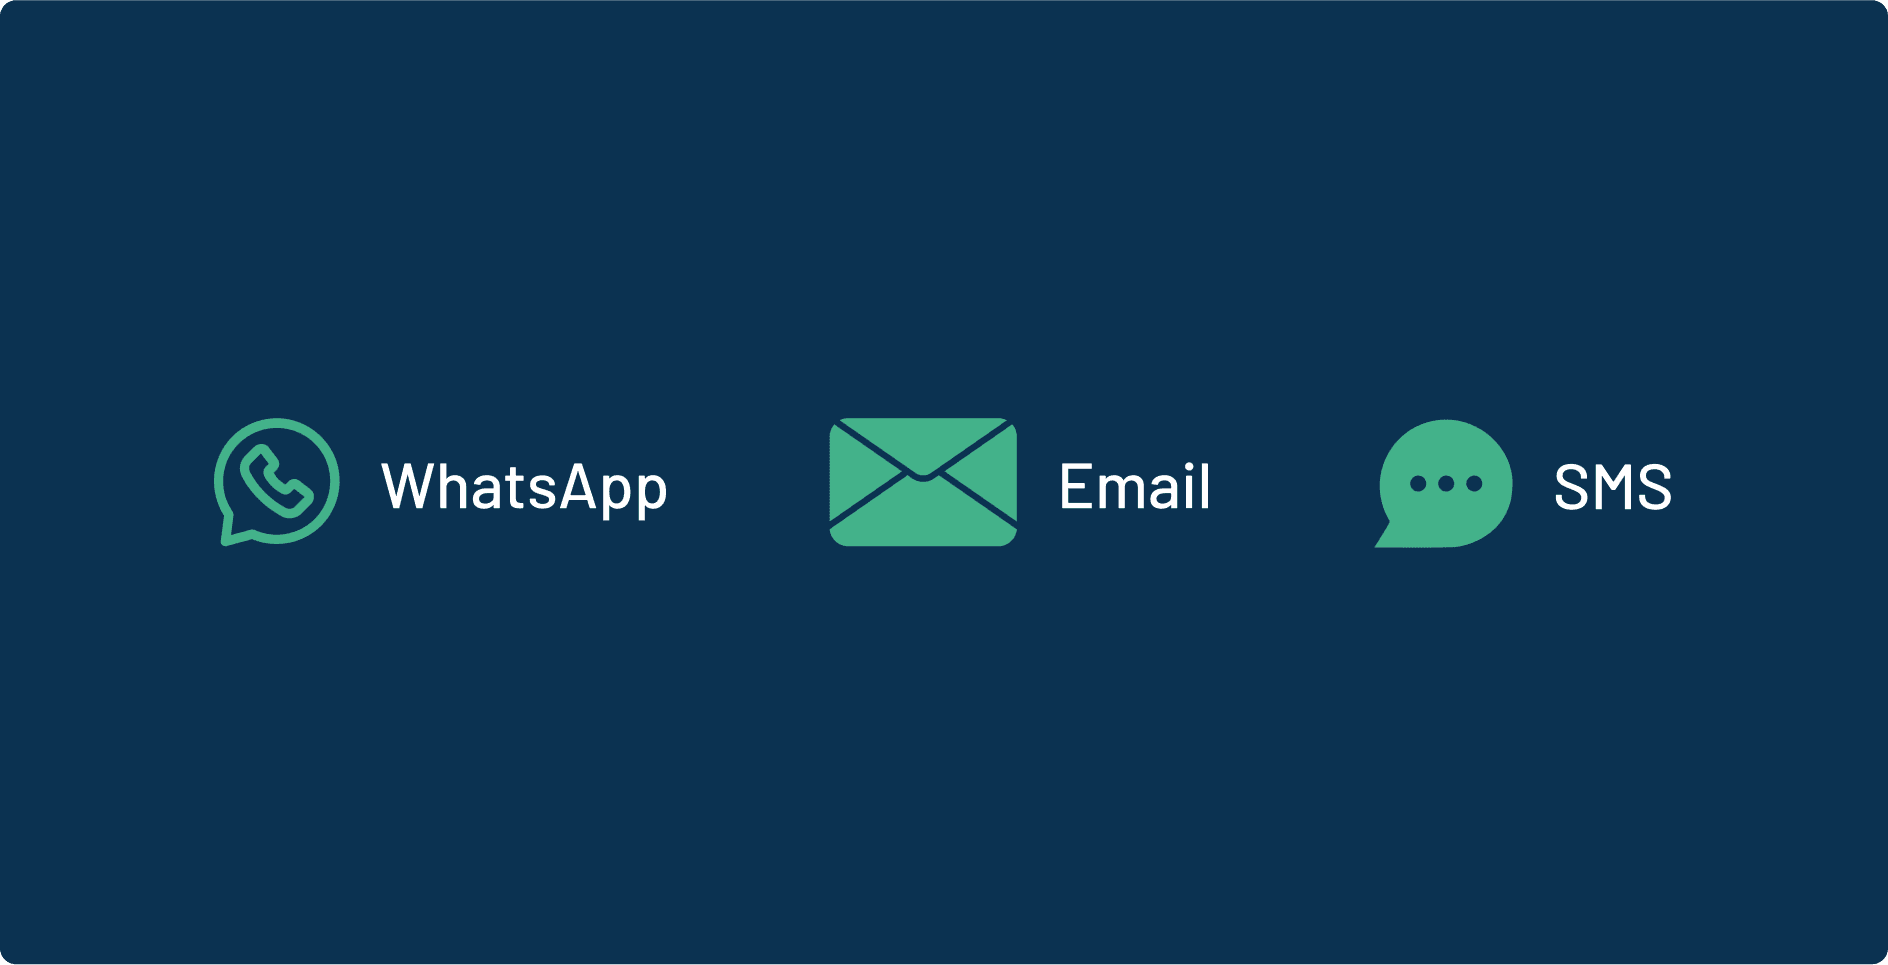 Asira - Notifications and reminders on WhatsApp, SMS and email.